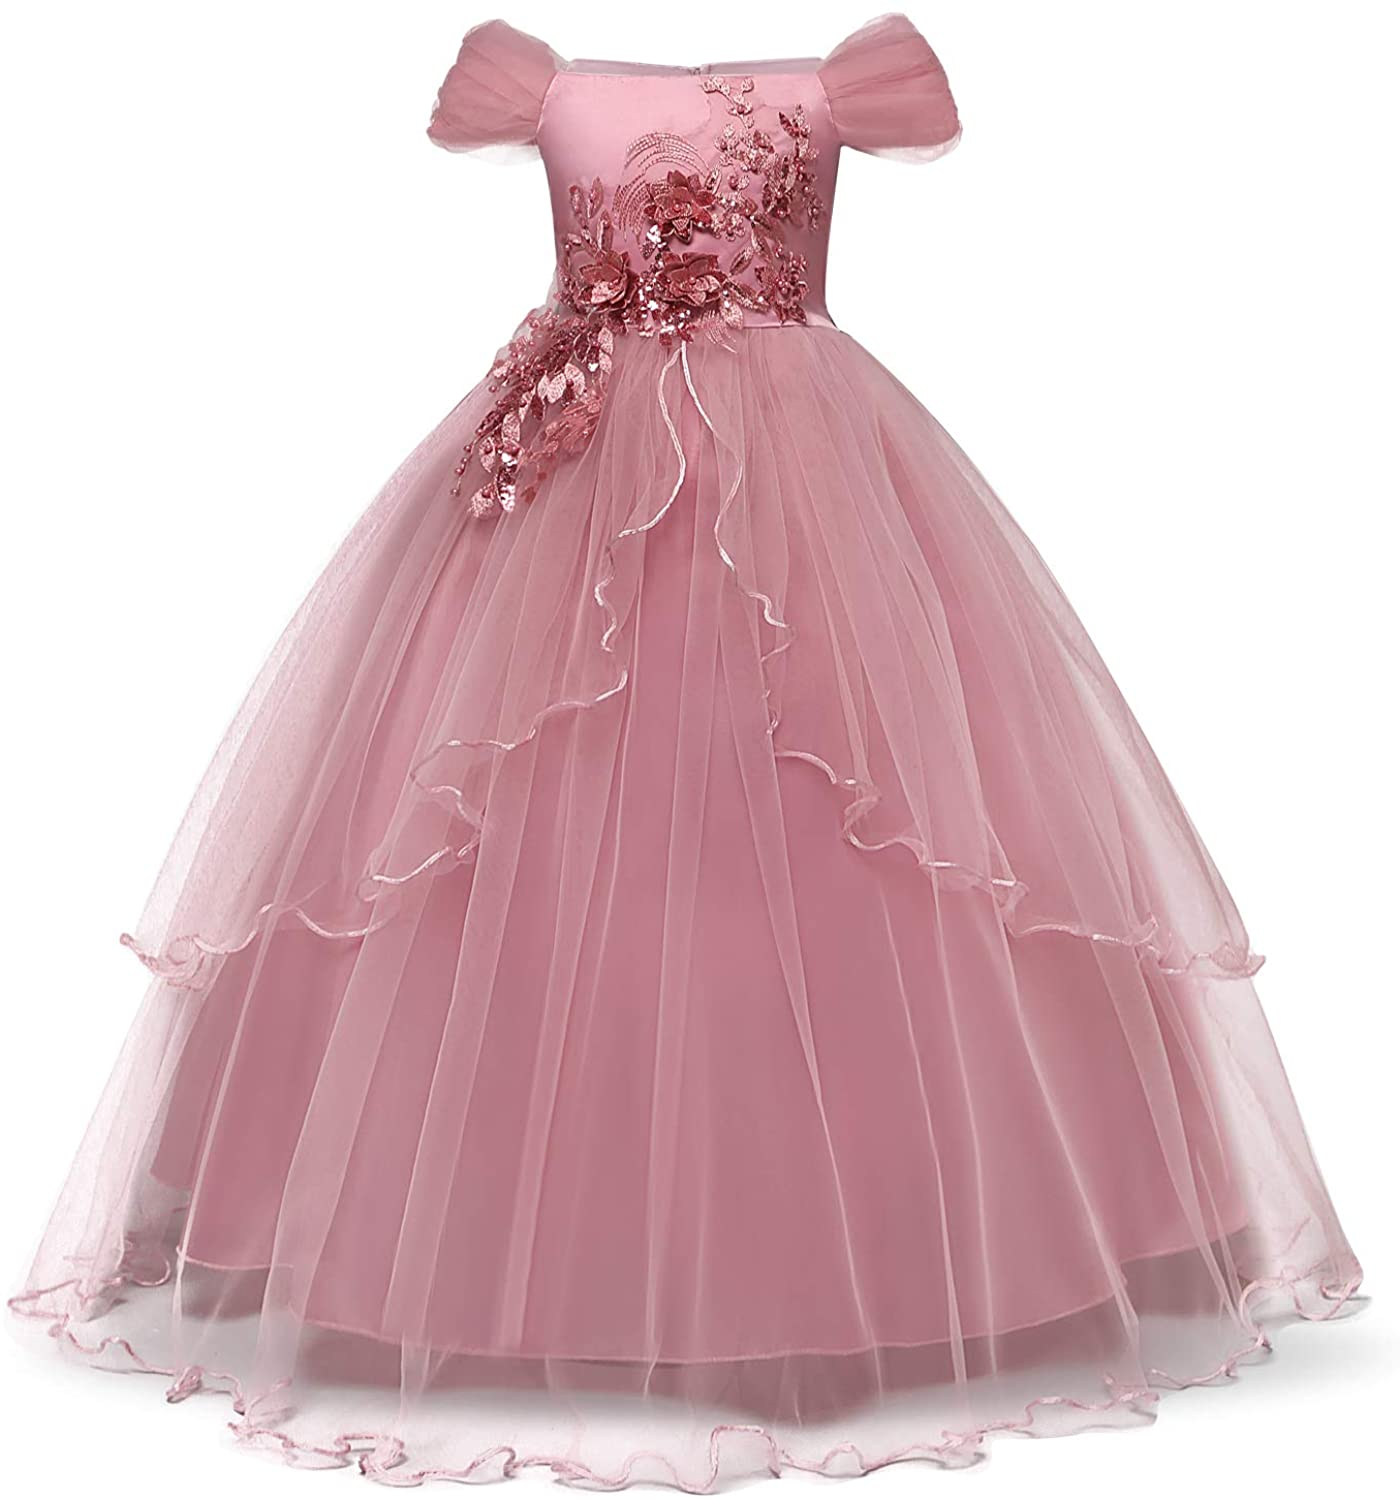 Embroidered Lace Strapless Princess Dress for Girls